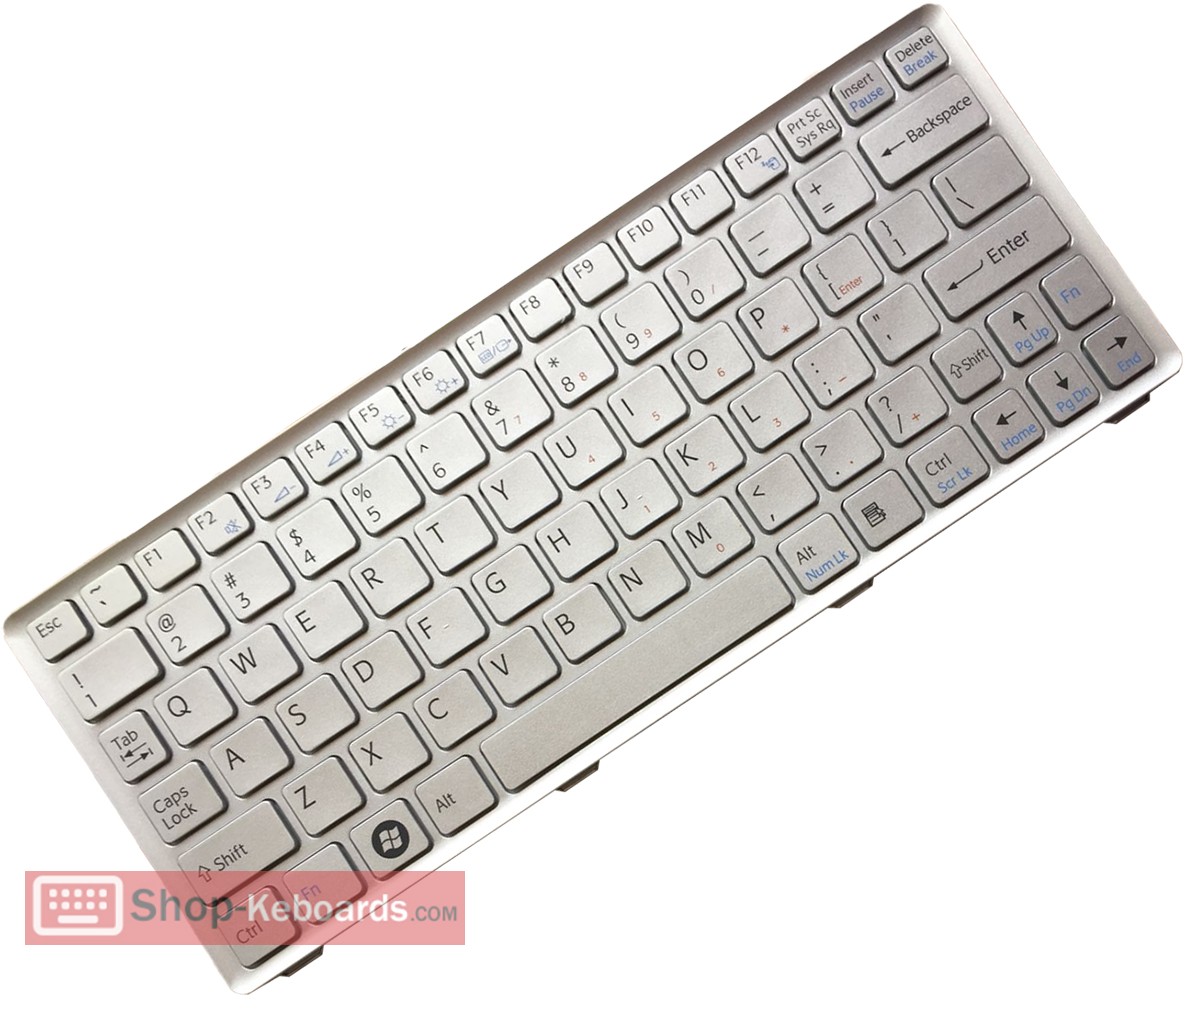 Sony Vaio VPC-W219 Keyboard replacement